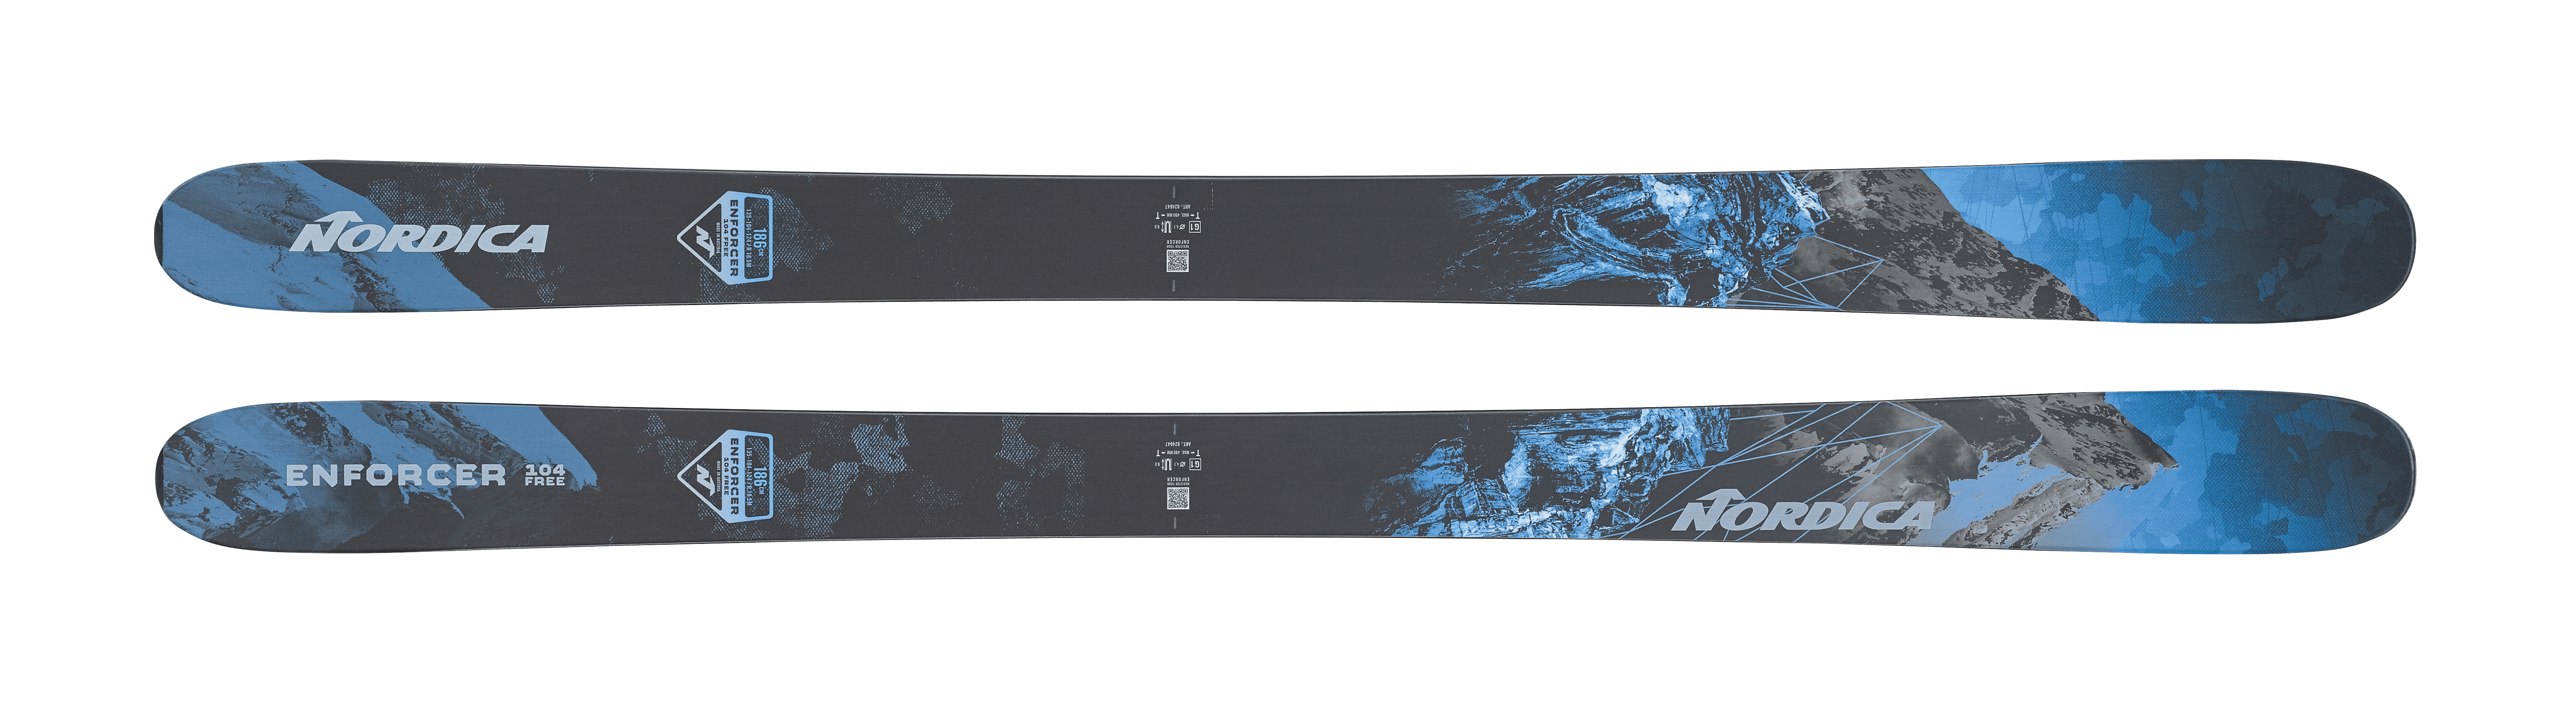 Picture of the Nordica Enforcer 104 free skis.